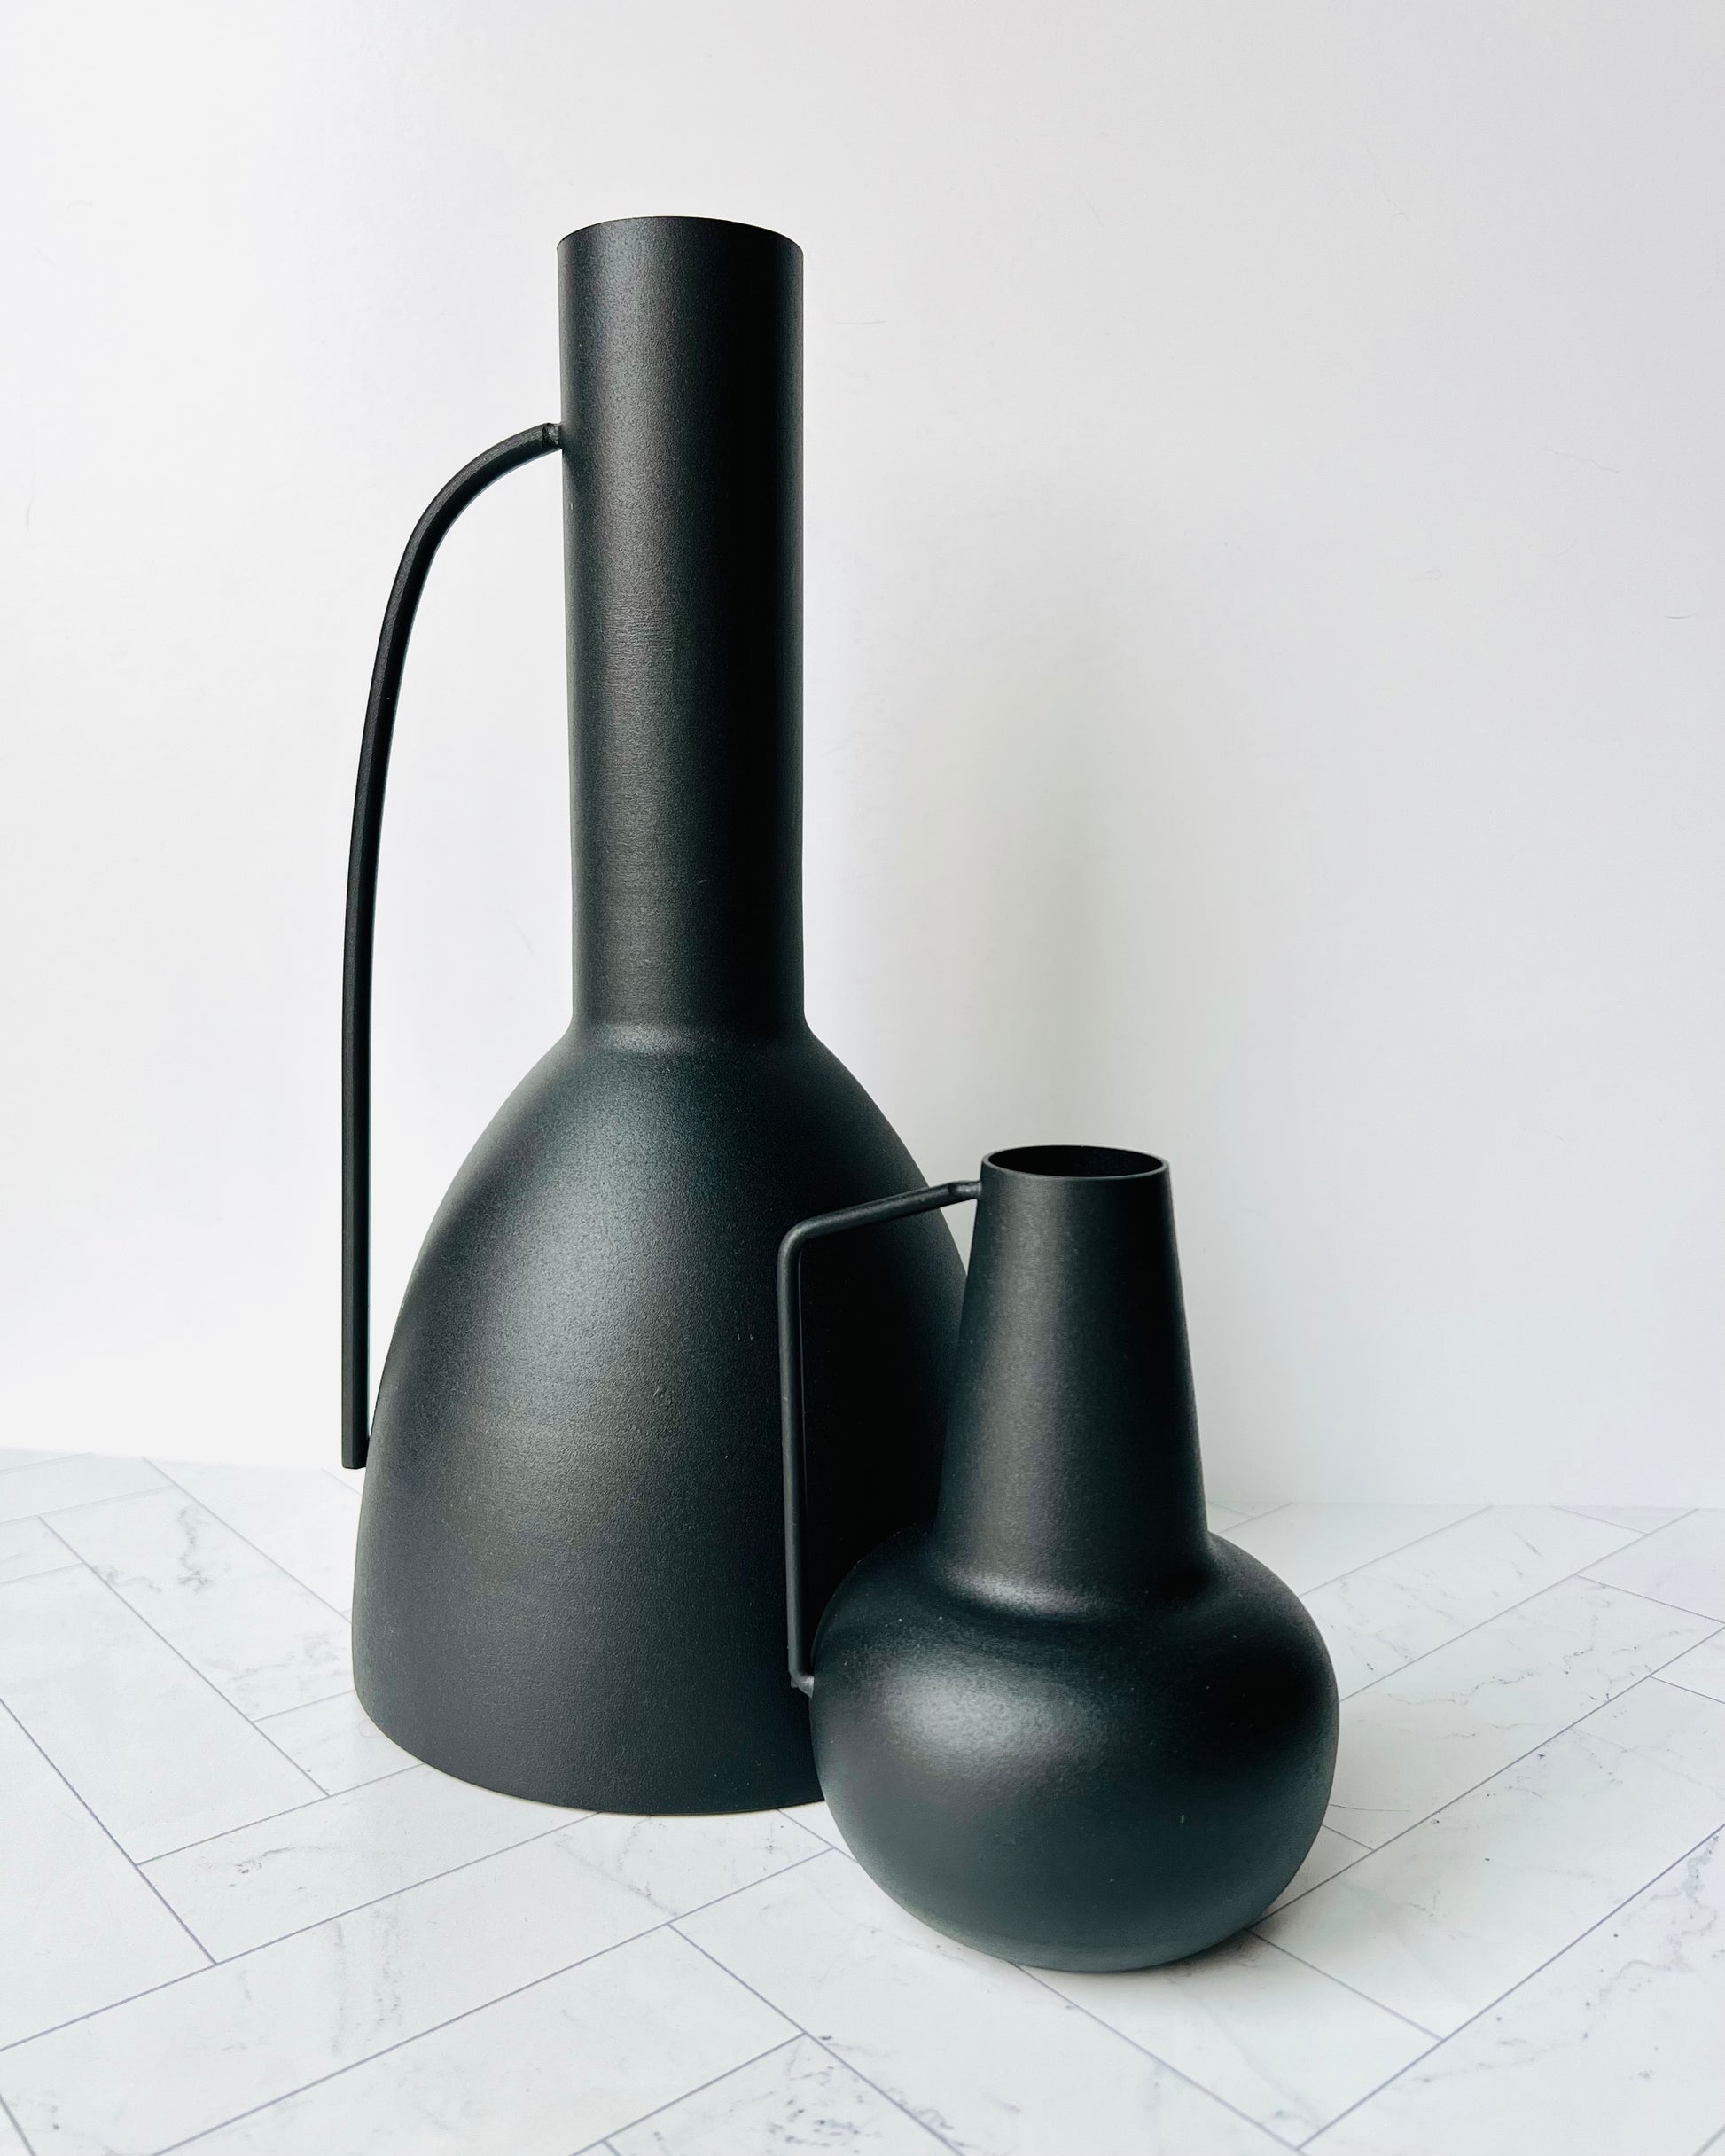 The Sleek Black Vase with its handle out next to the Sleek Bud Vase